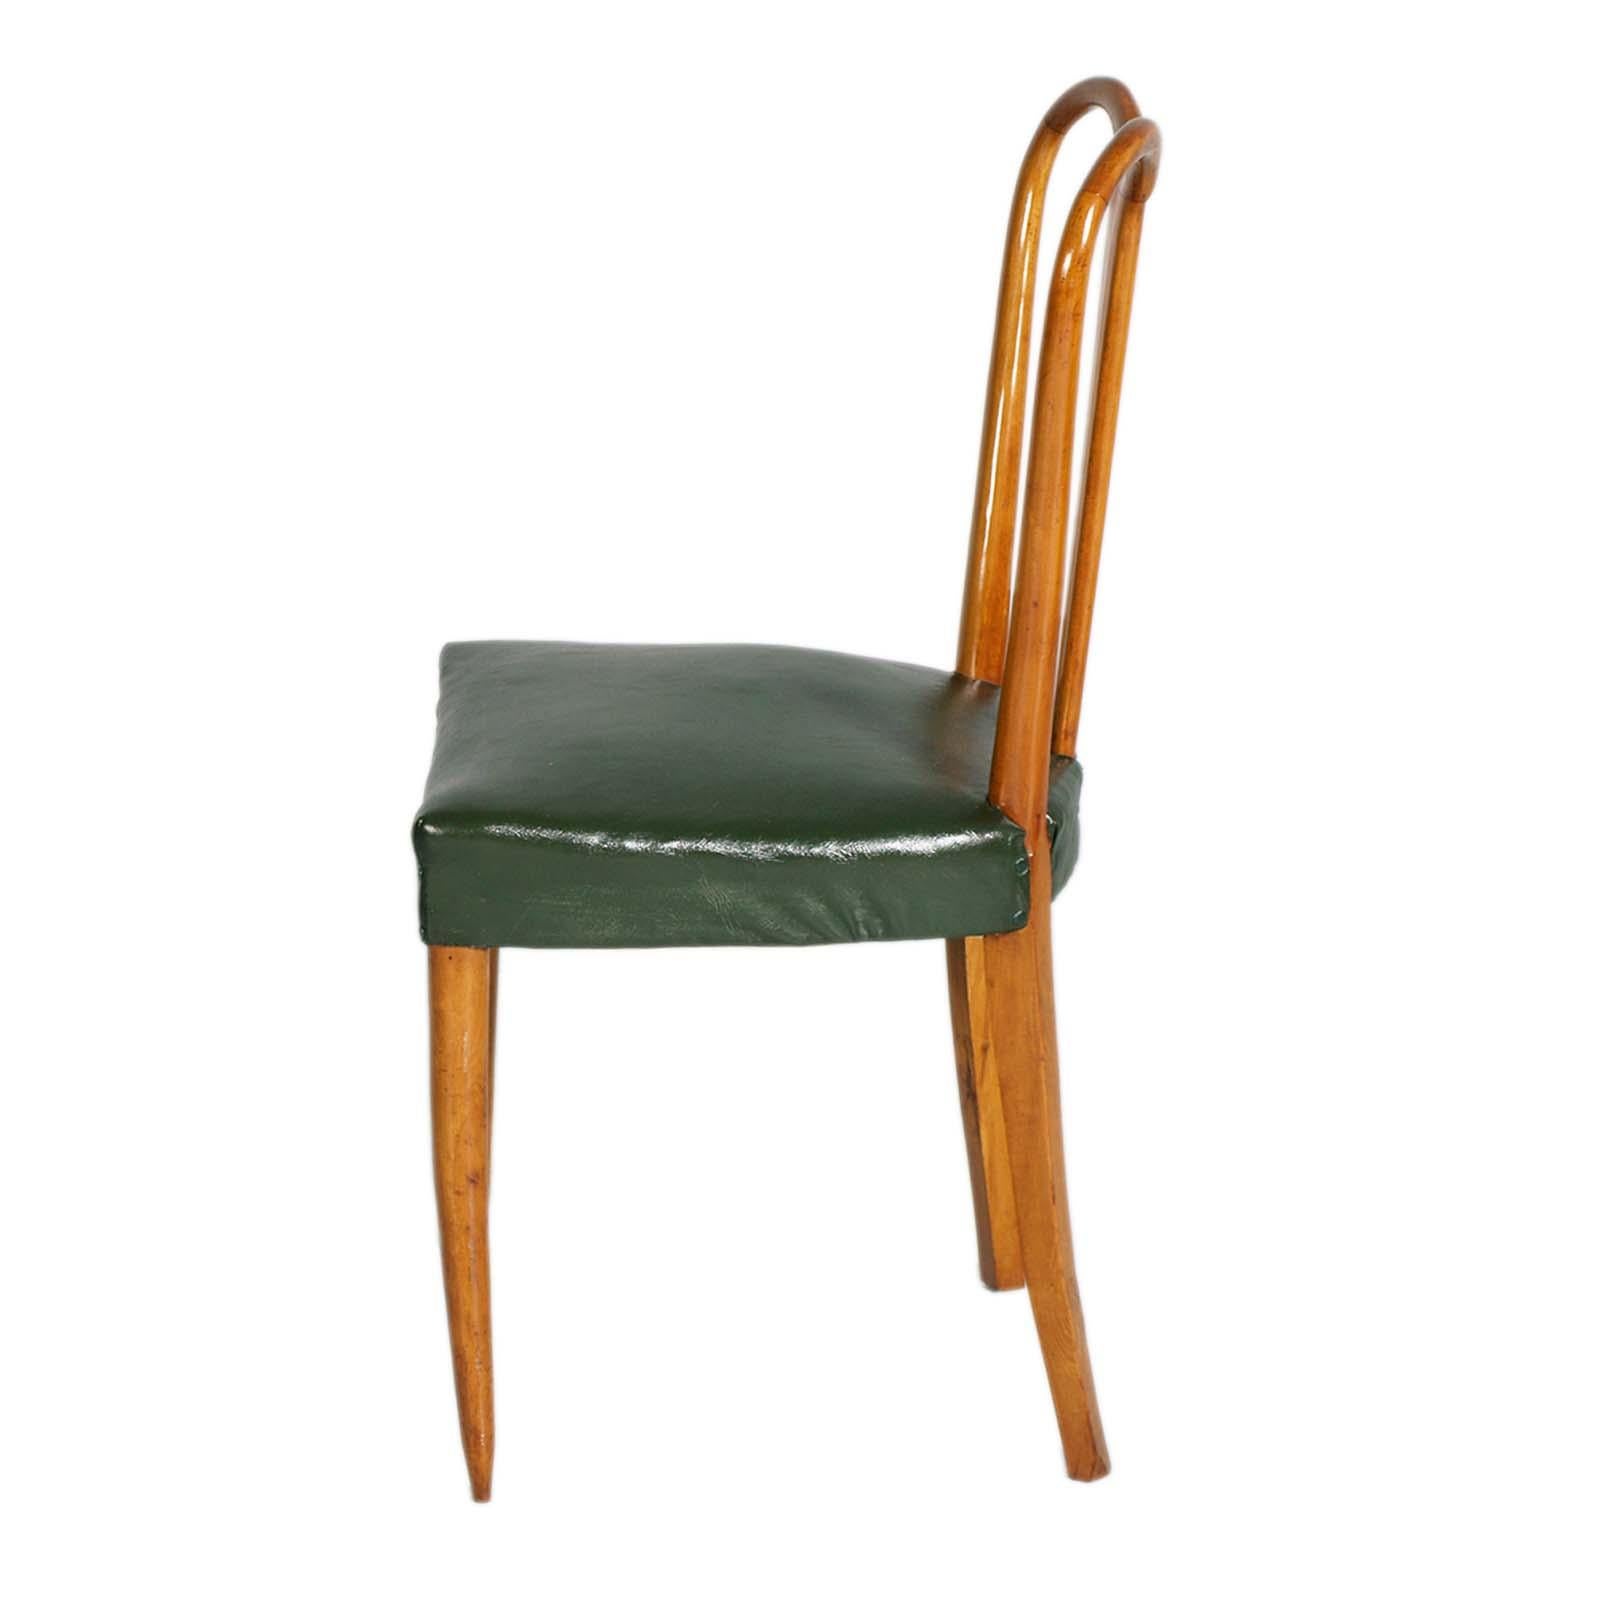 Mid-Century Modern Mid-Century Chairs by Ico Parisi for Fratelli Rizzi, Springs Seat & Leatherette For Sale